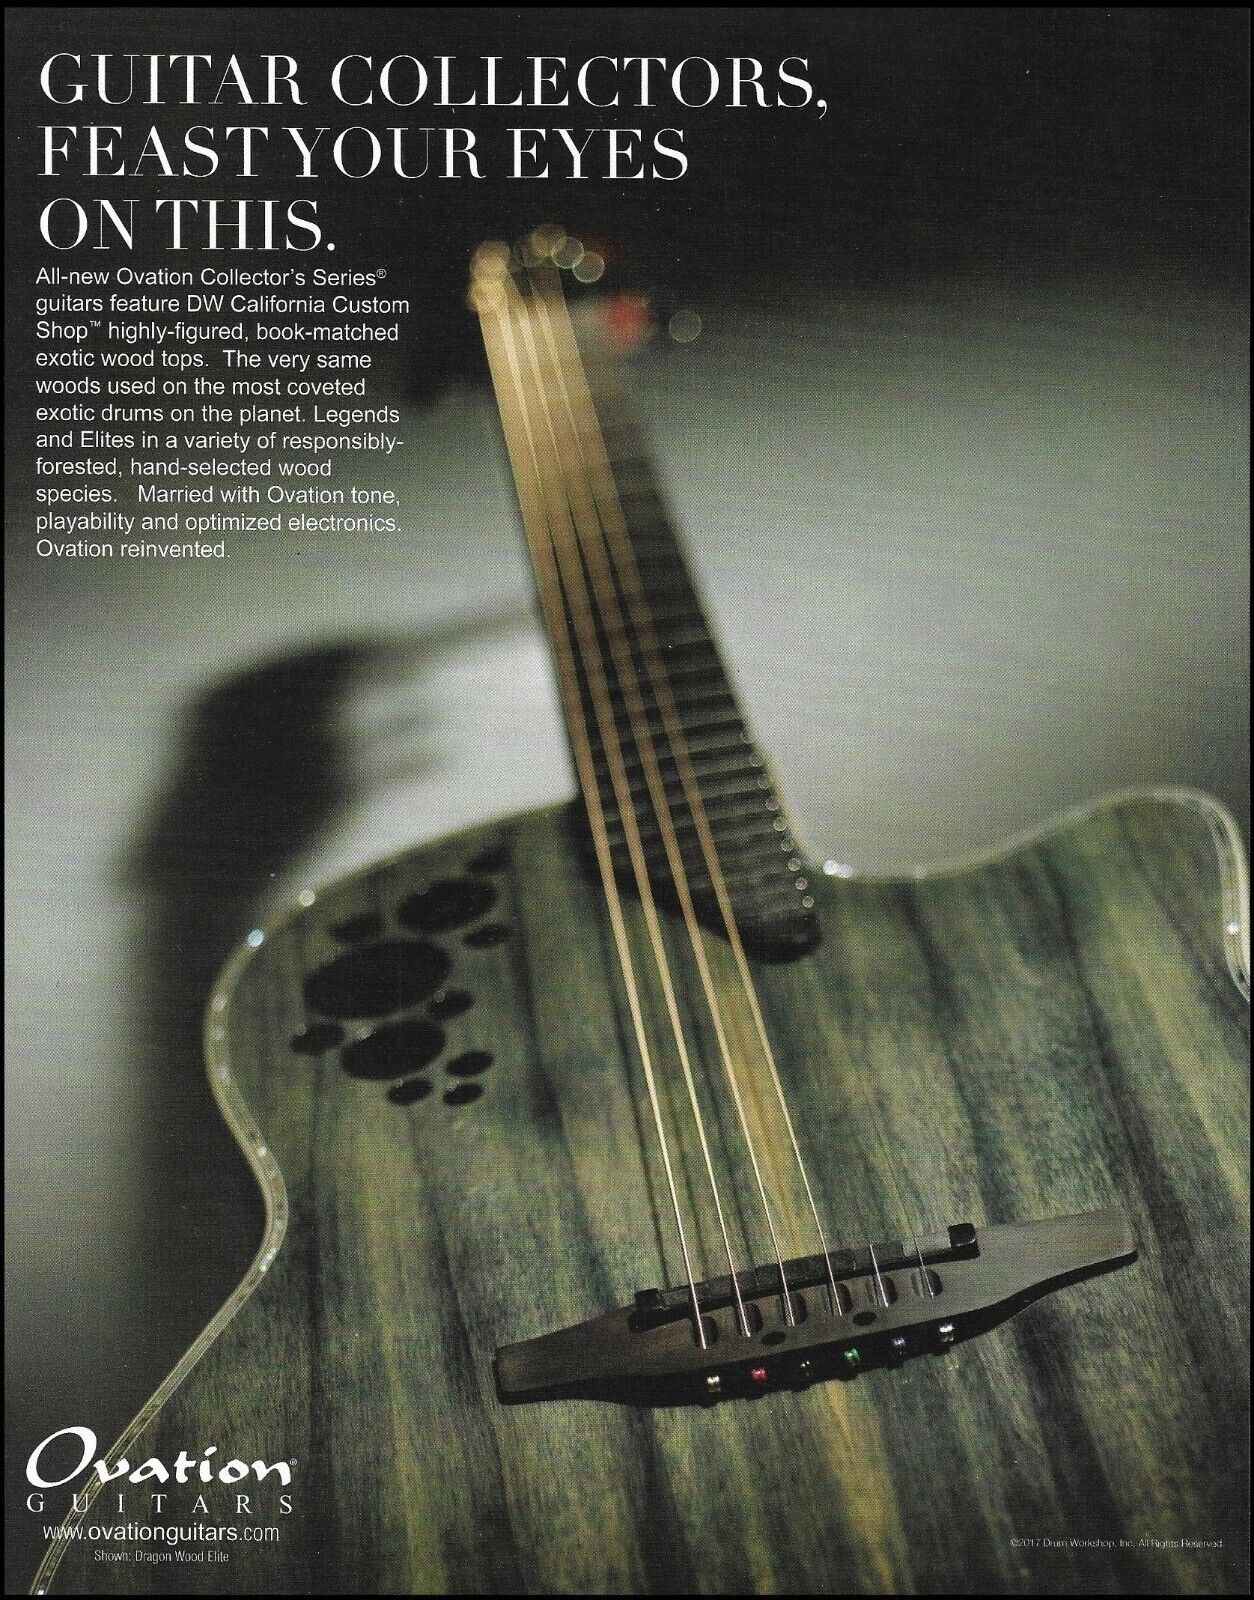 Ovation Dragon Wood Elite 2018 DW Collector\'s Series guitar ad print